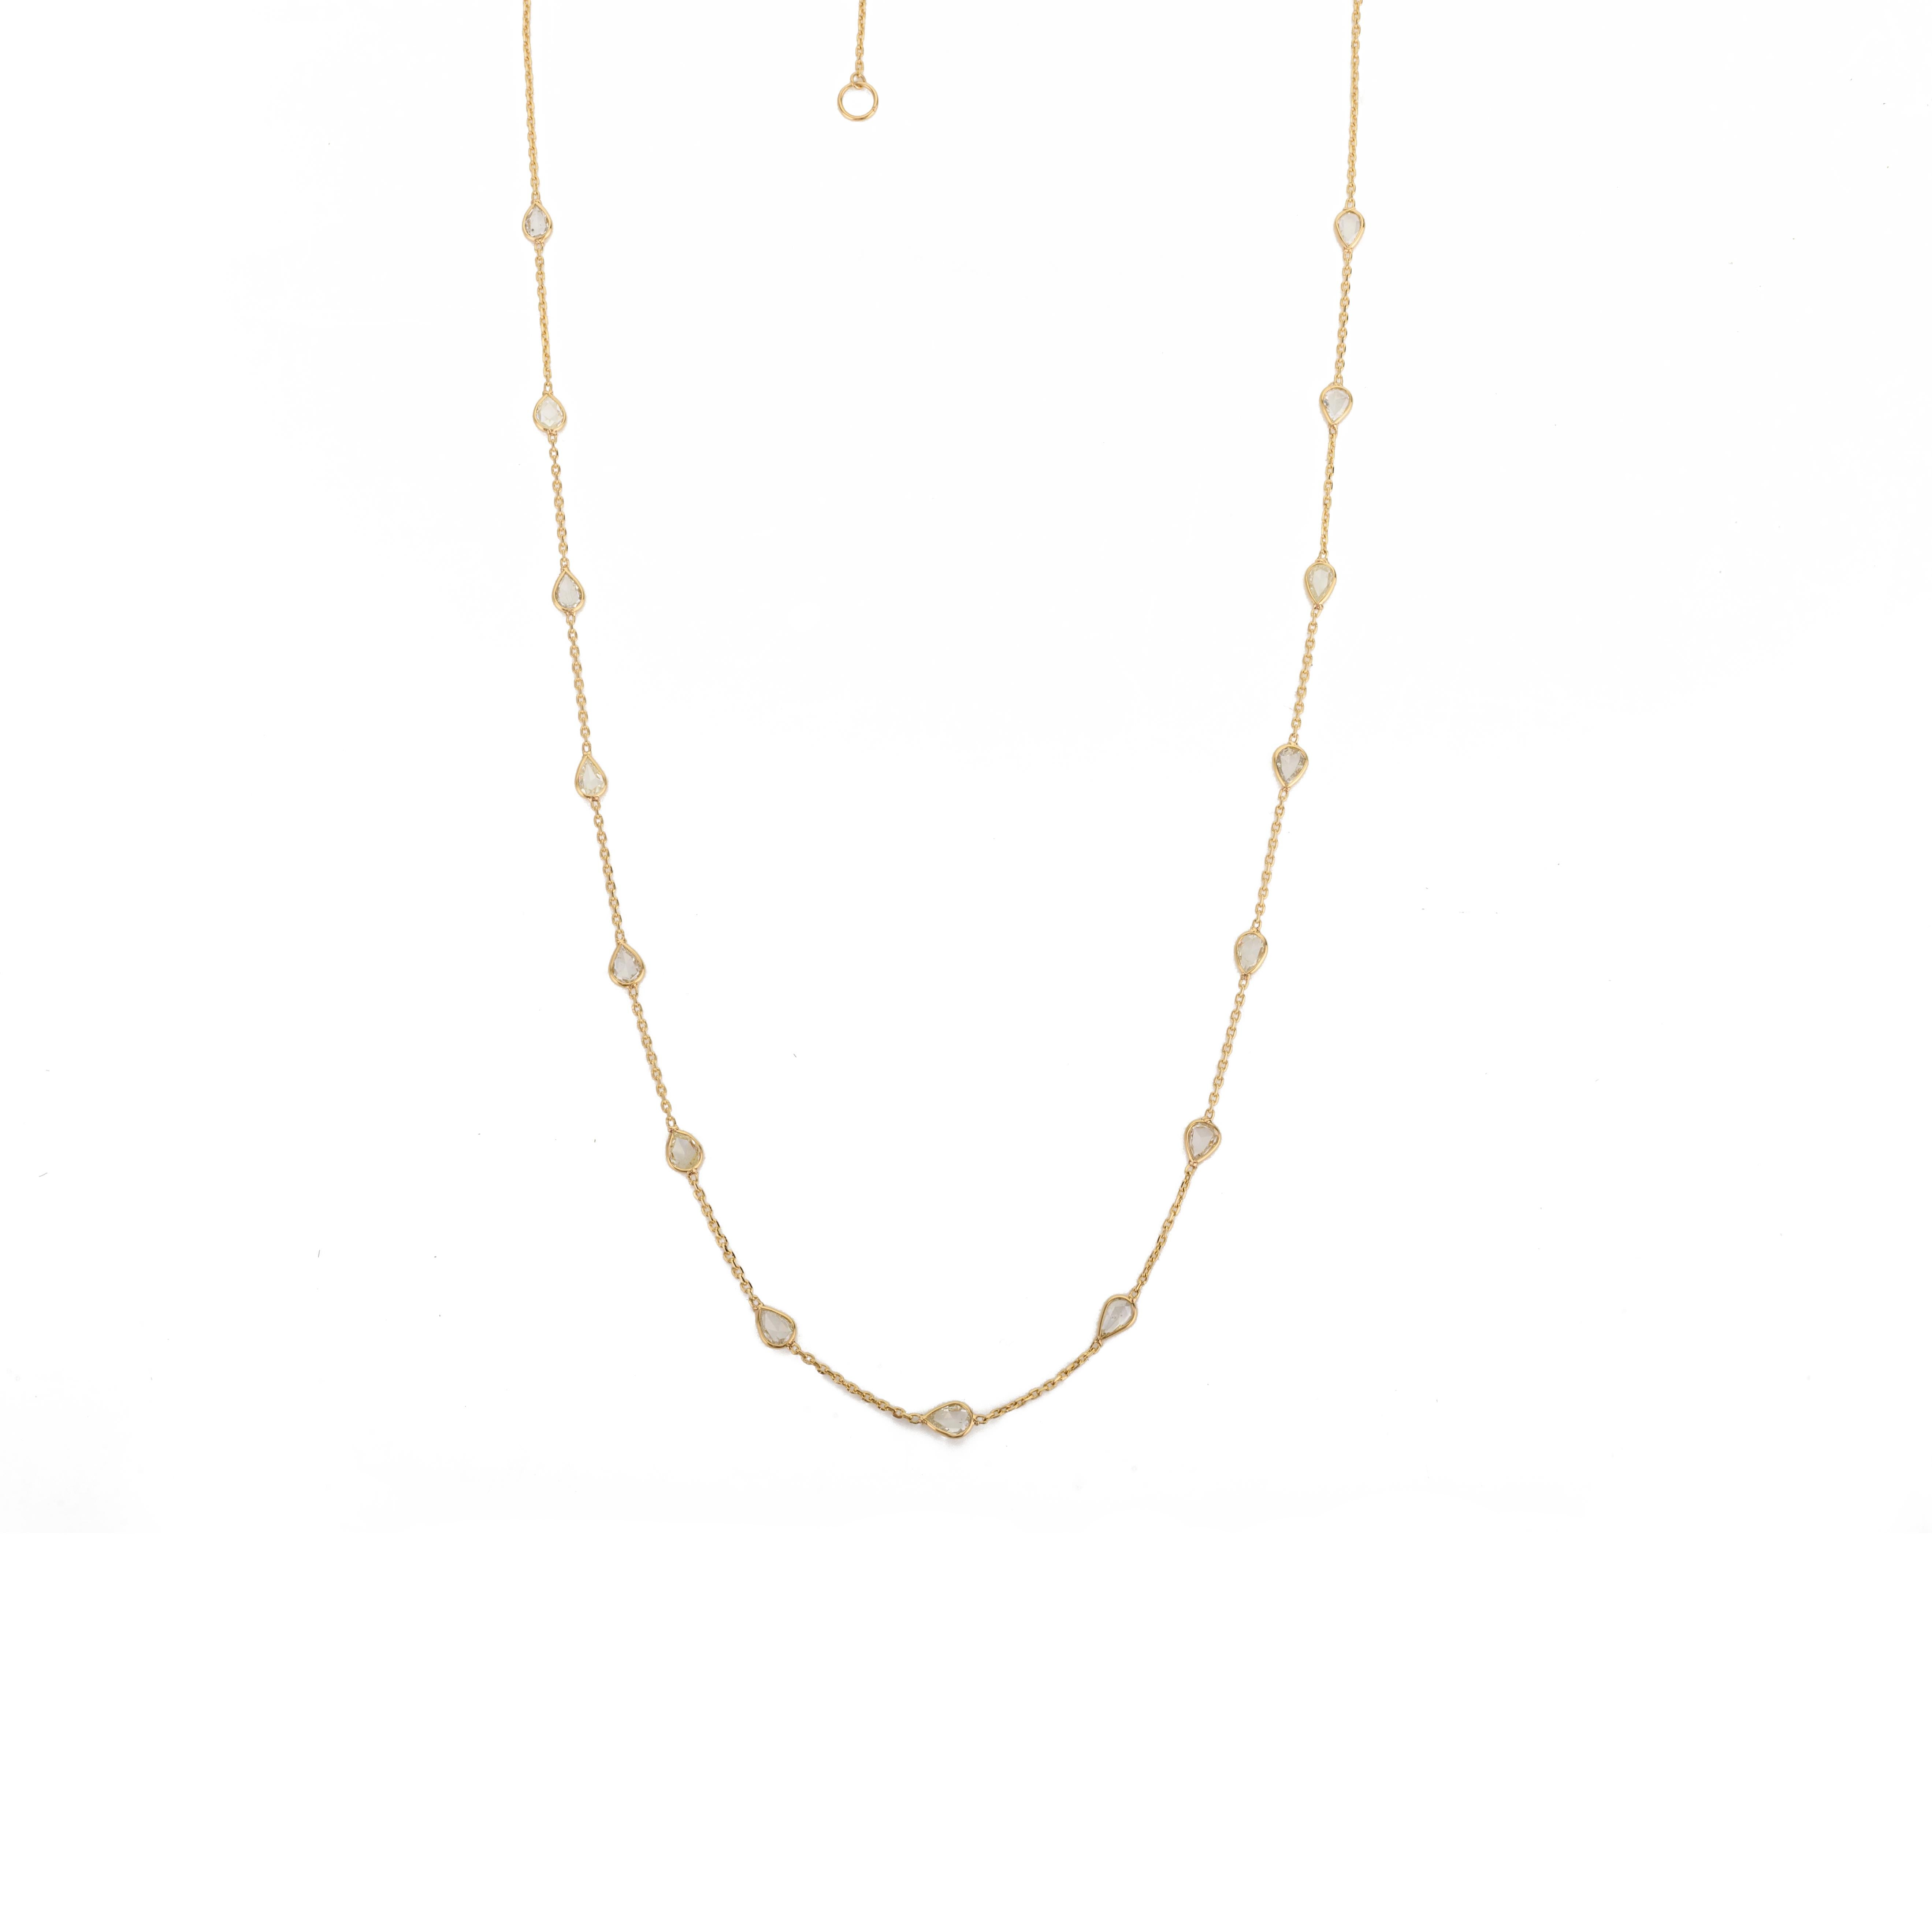 Natural Uncut Diamond Necklace Crafted in 18 Karat Solid Yellow Gold for Her For Sale 1